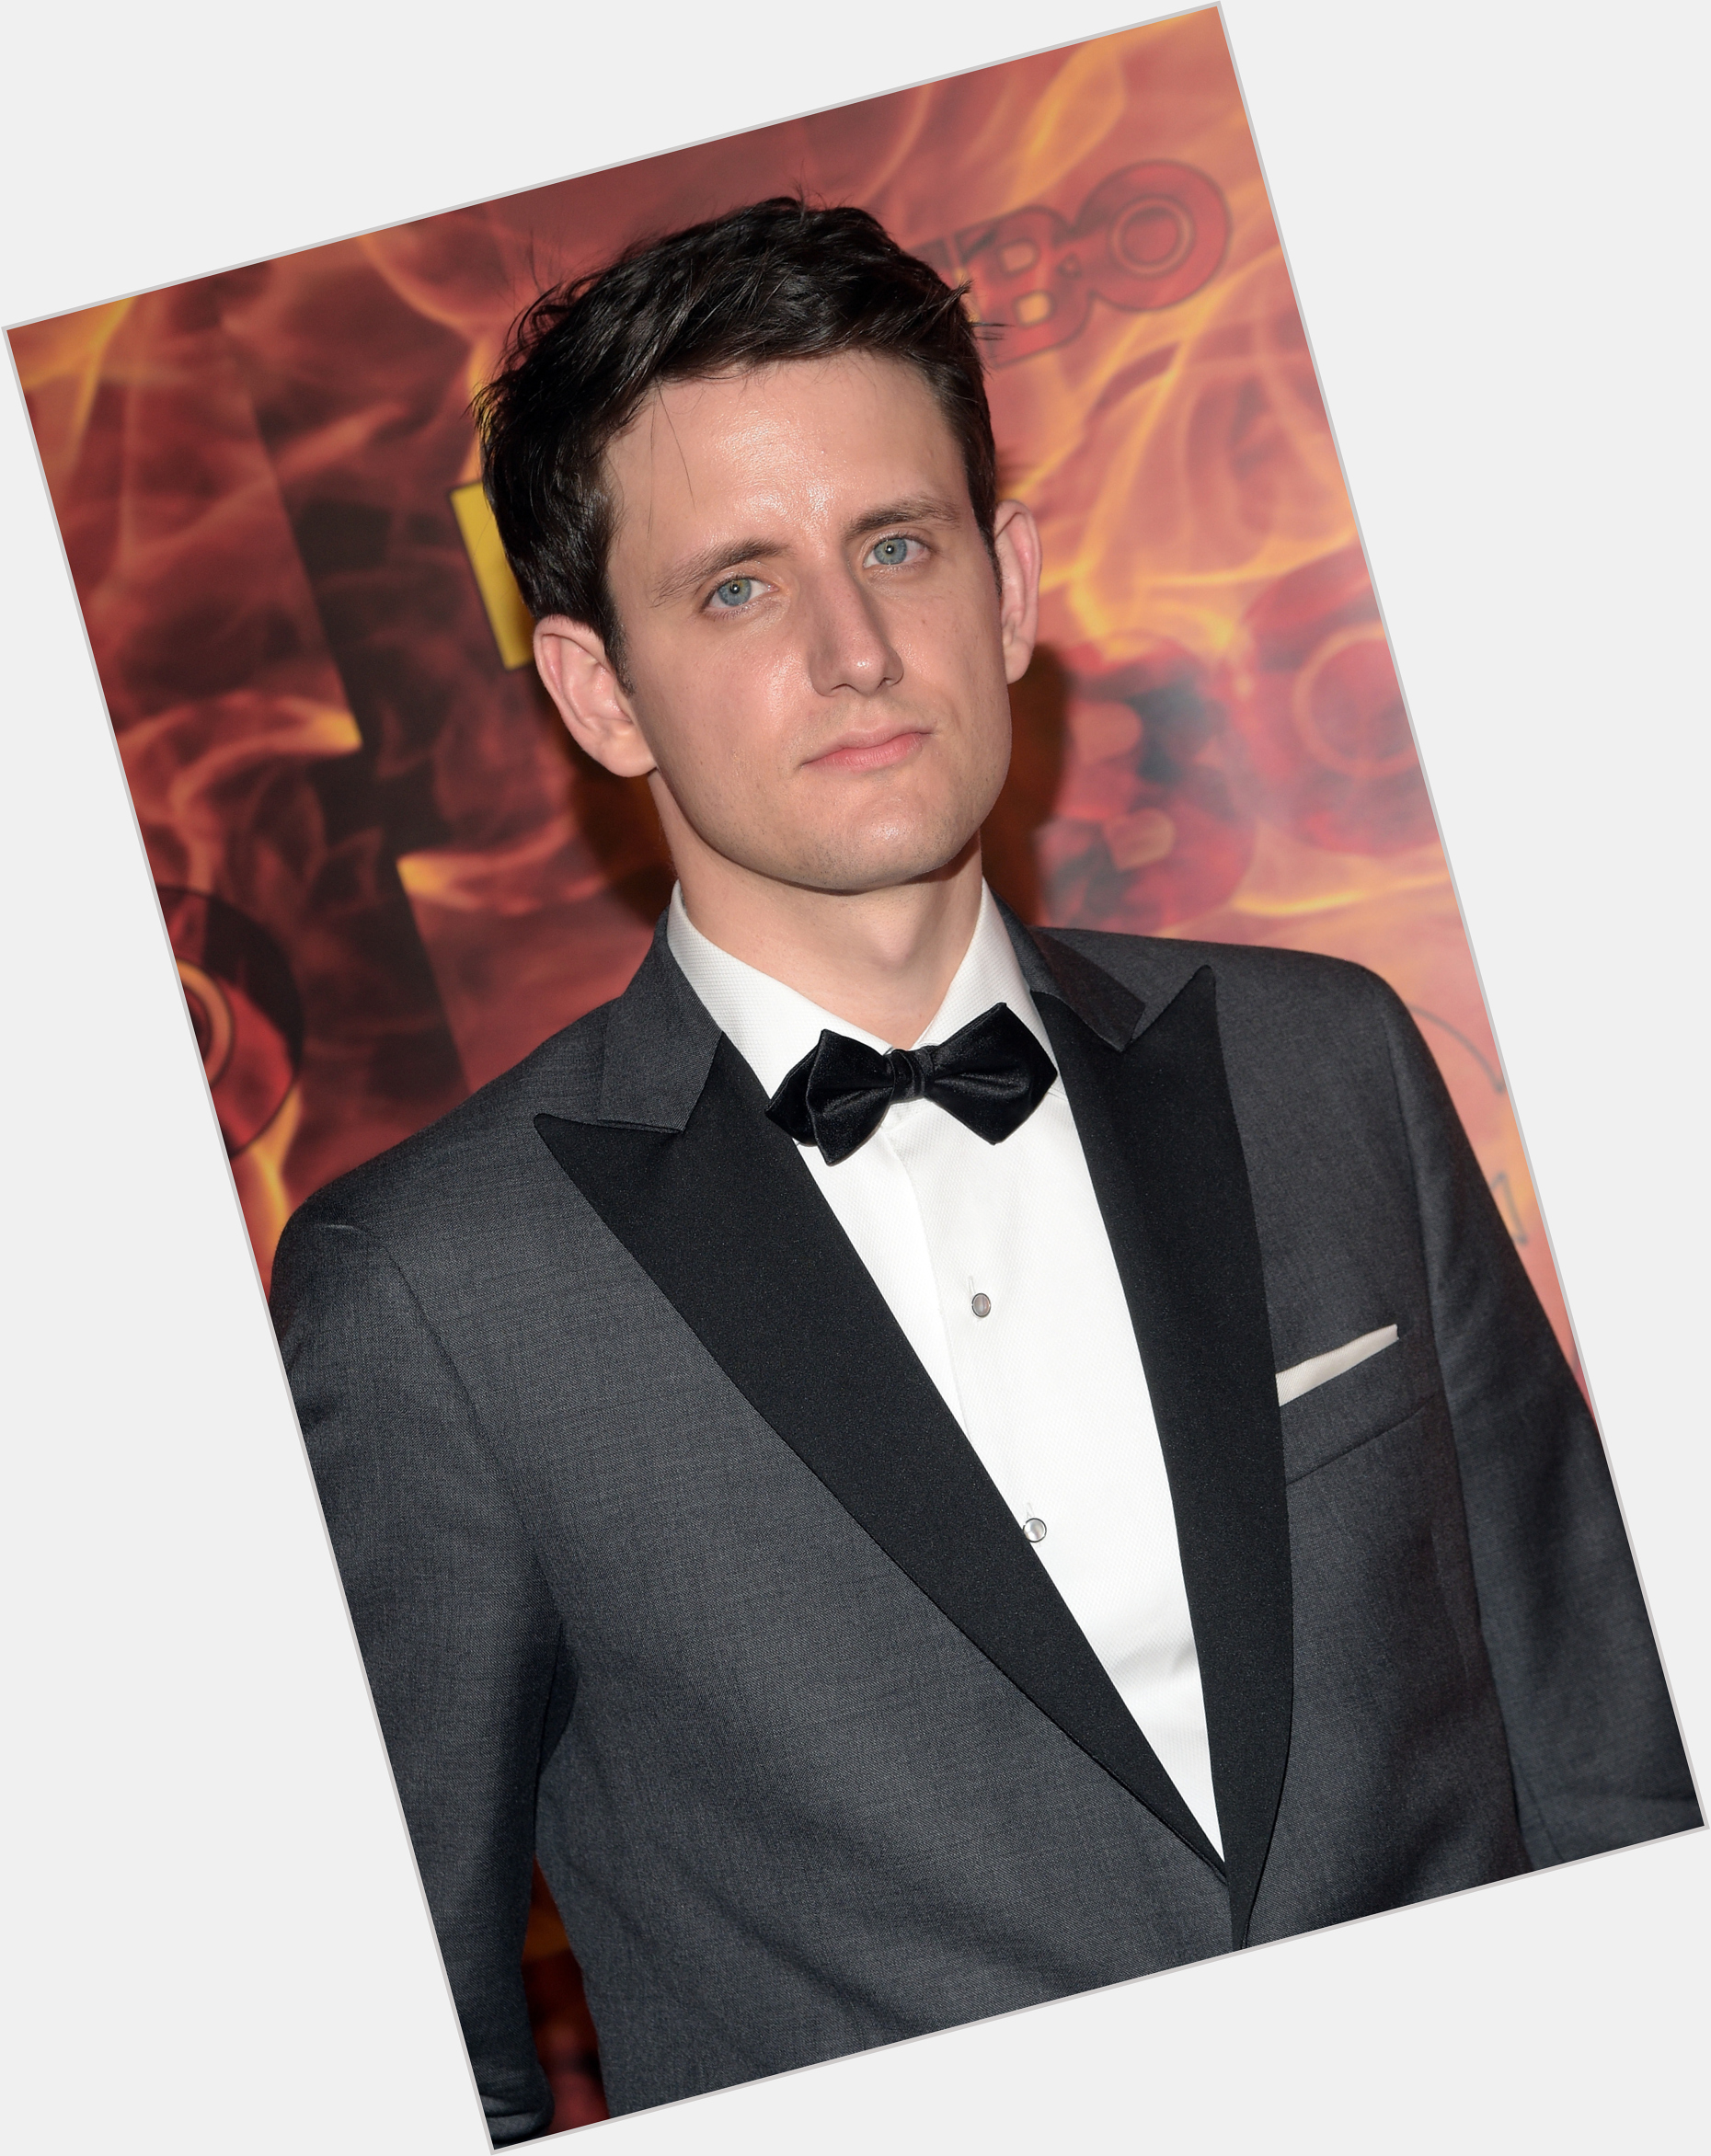 zach woods the office 1